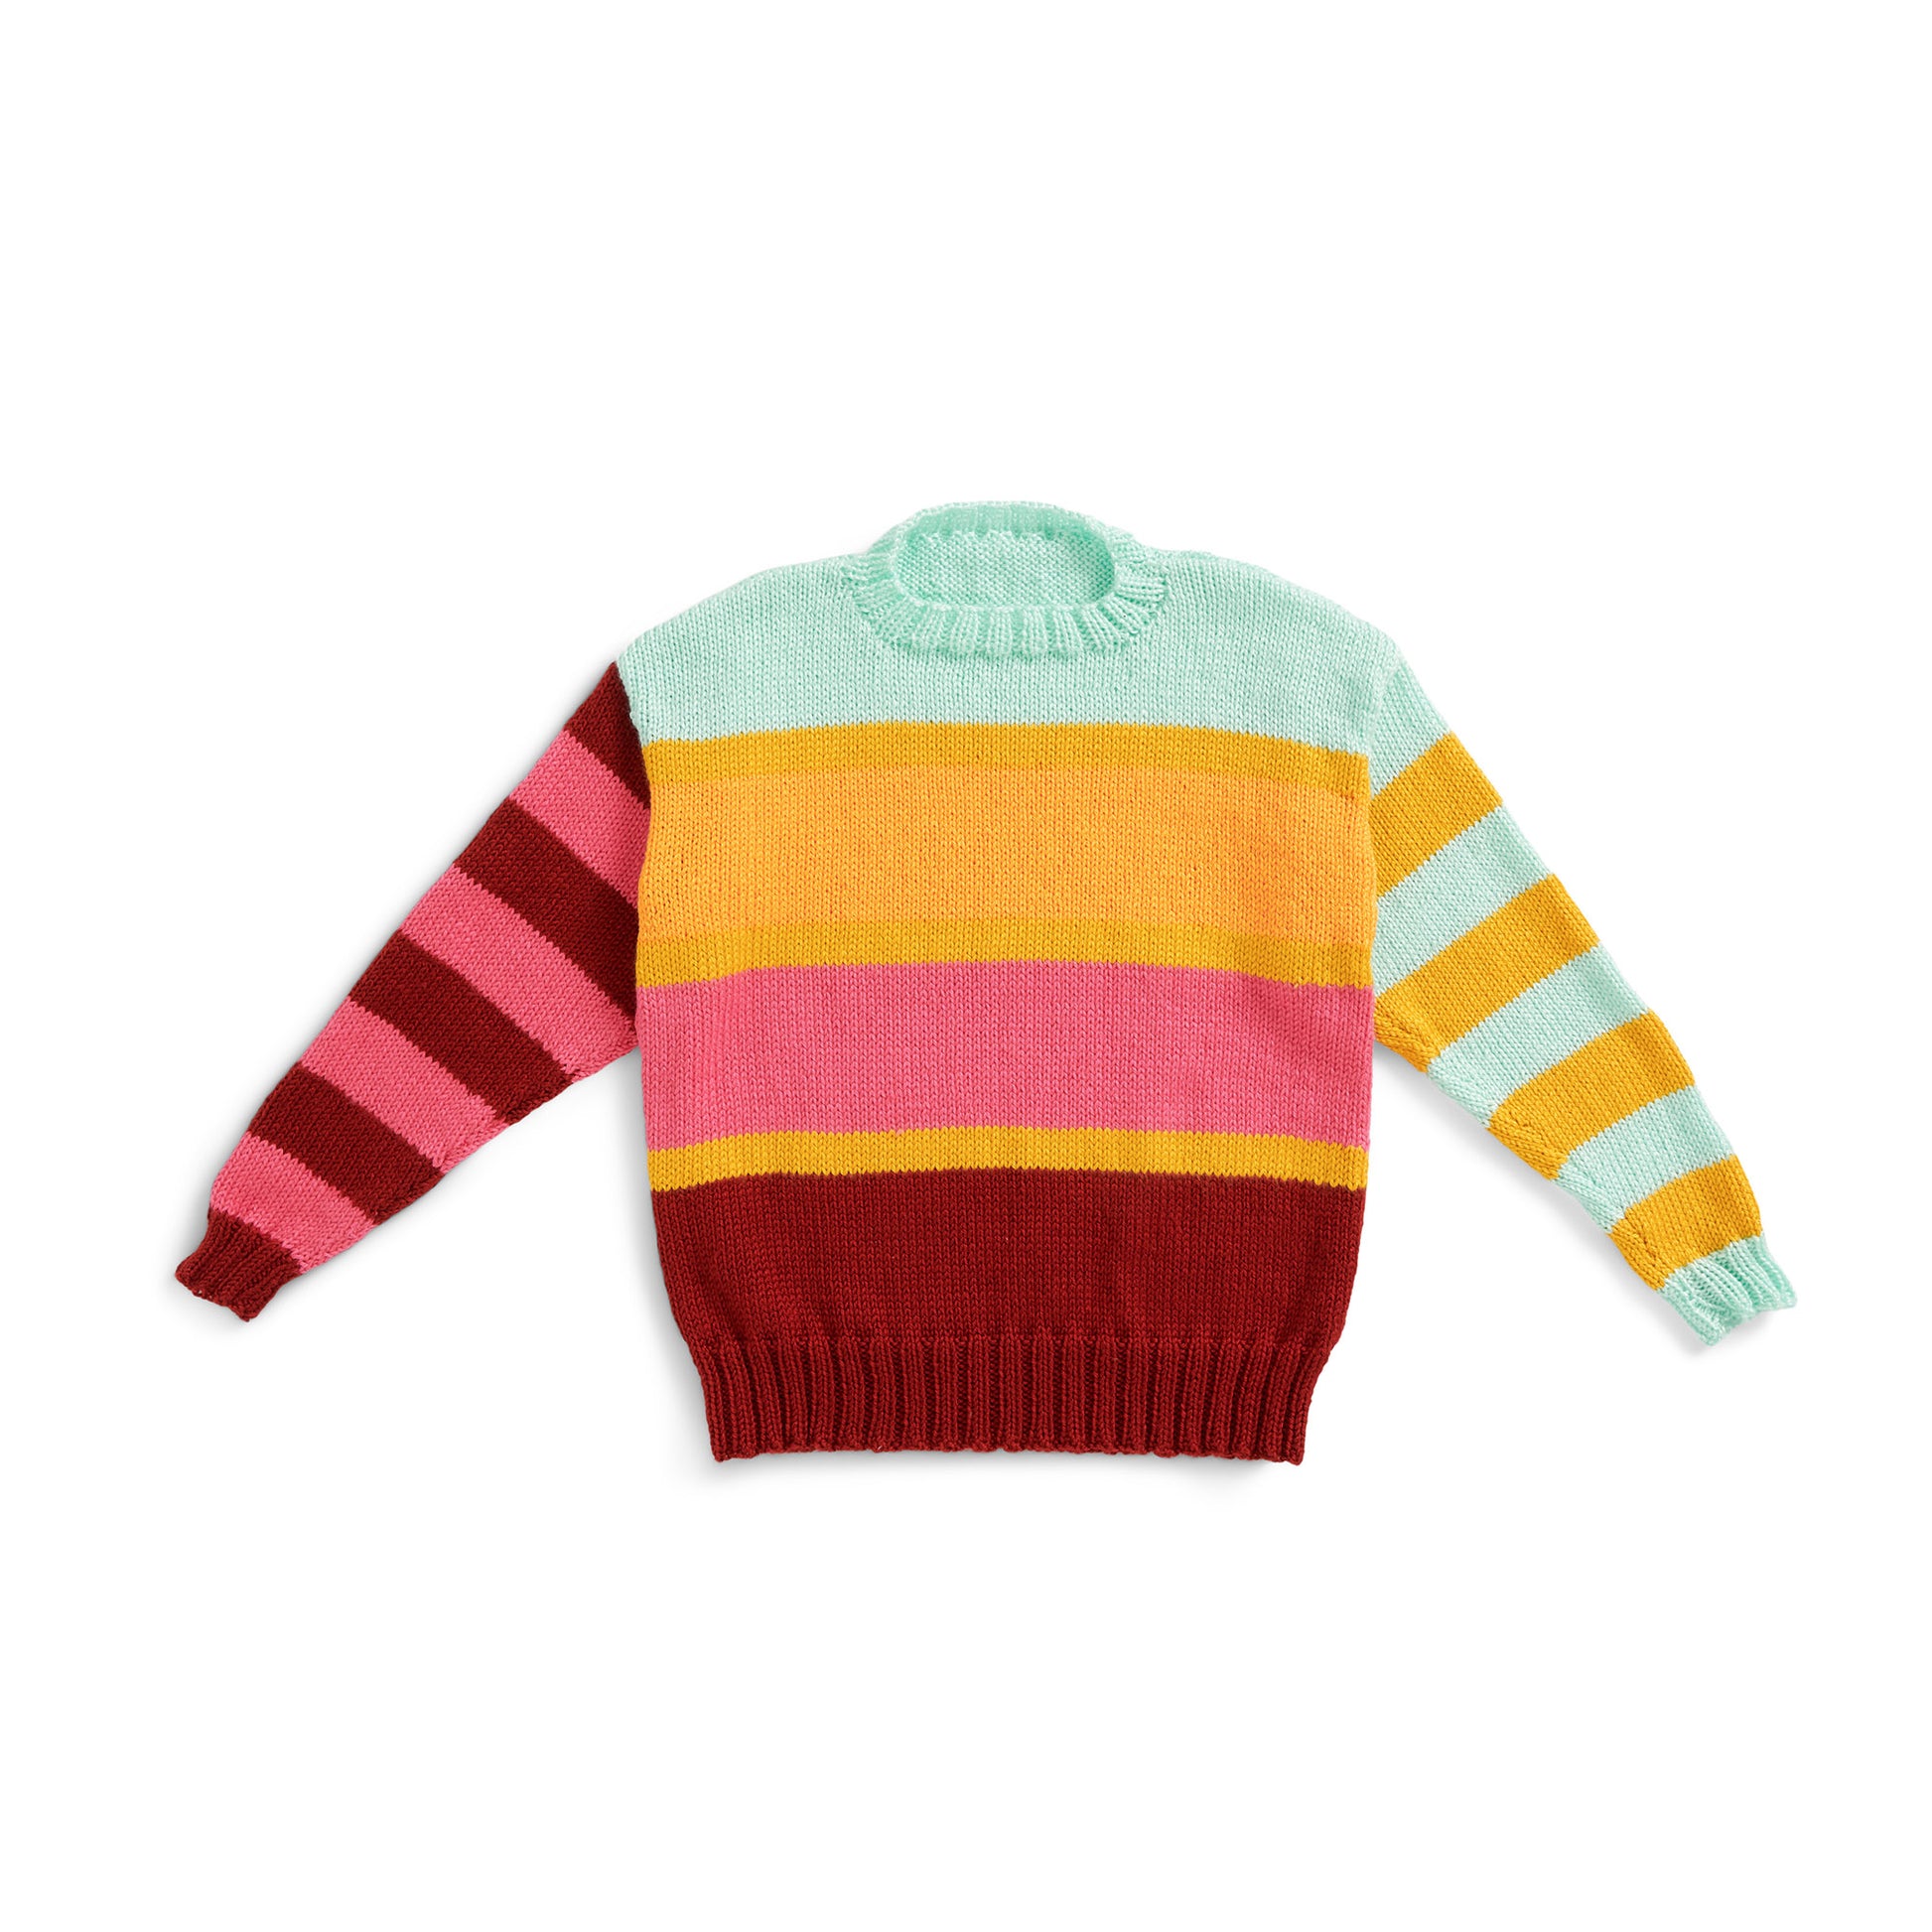 Caron Simply Soft Candy Bands Knit Sweater Caron Simply Soft Candy Bands Knit Sweater